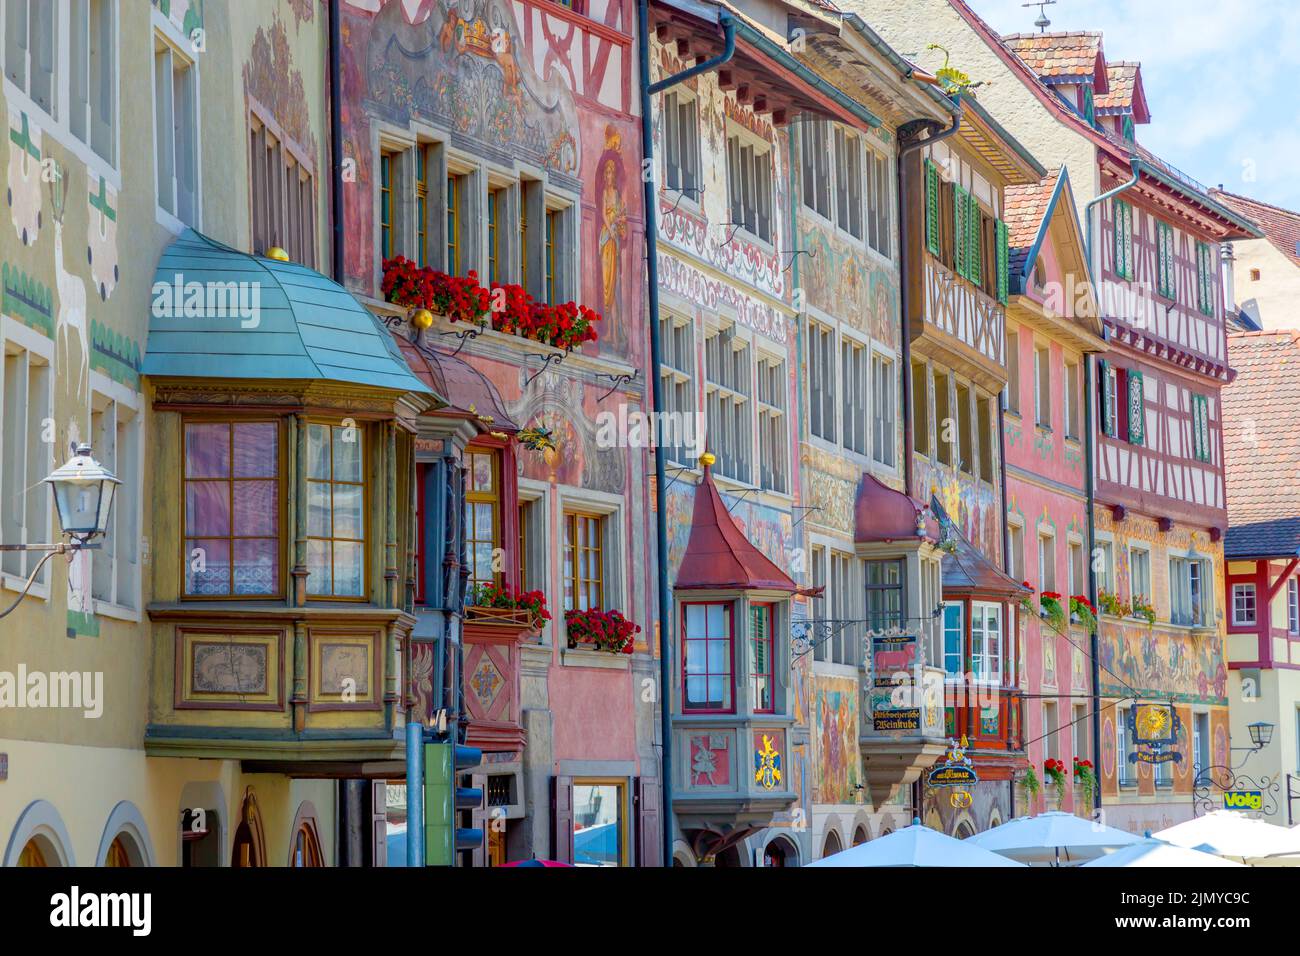 Well-preserved Old Town in Stein am Rhein, featuring painted facades and half-timbered houses. Stein am Rhein is situated in the midst of beautiful co Stock Photo